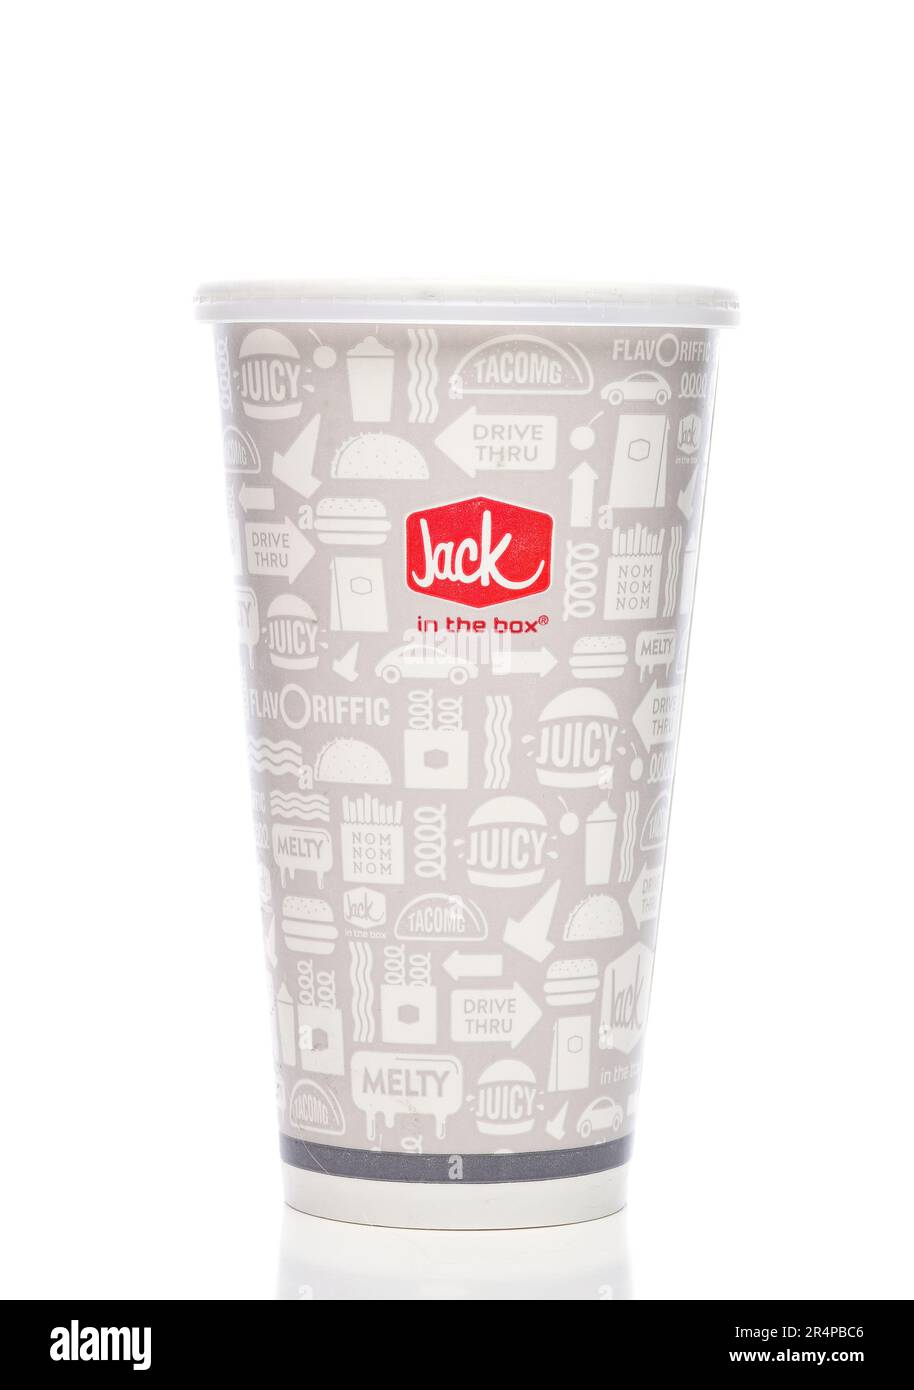 IRIVNE, CALIFORNIA - 29 MAY 20223: A disposable drink cup from Jack in the Box fast-food restaurant. Stock Photo